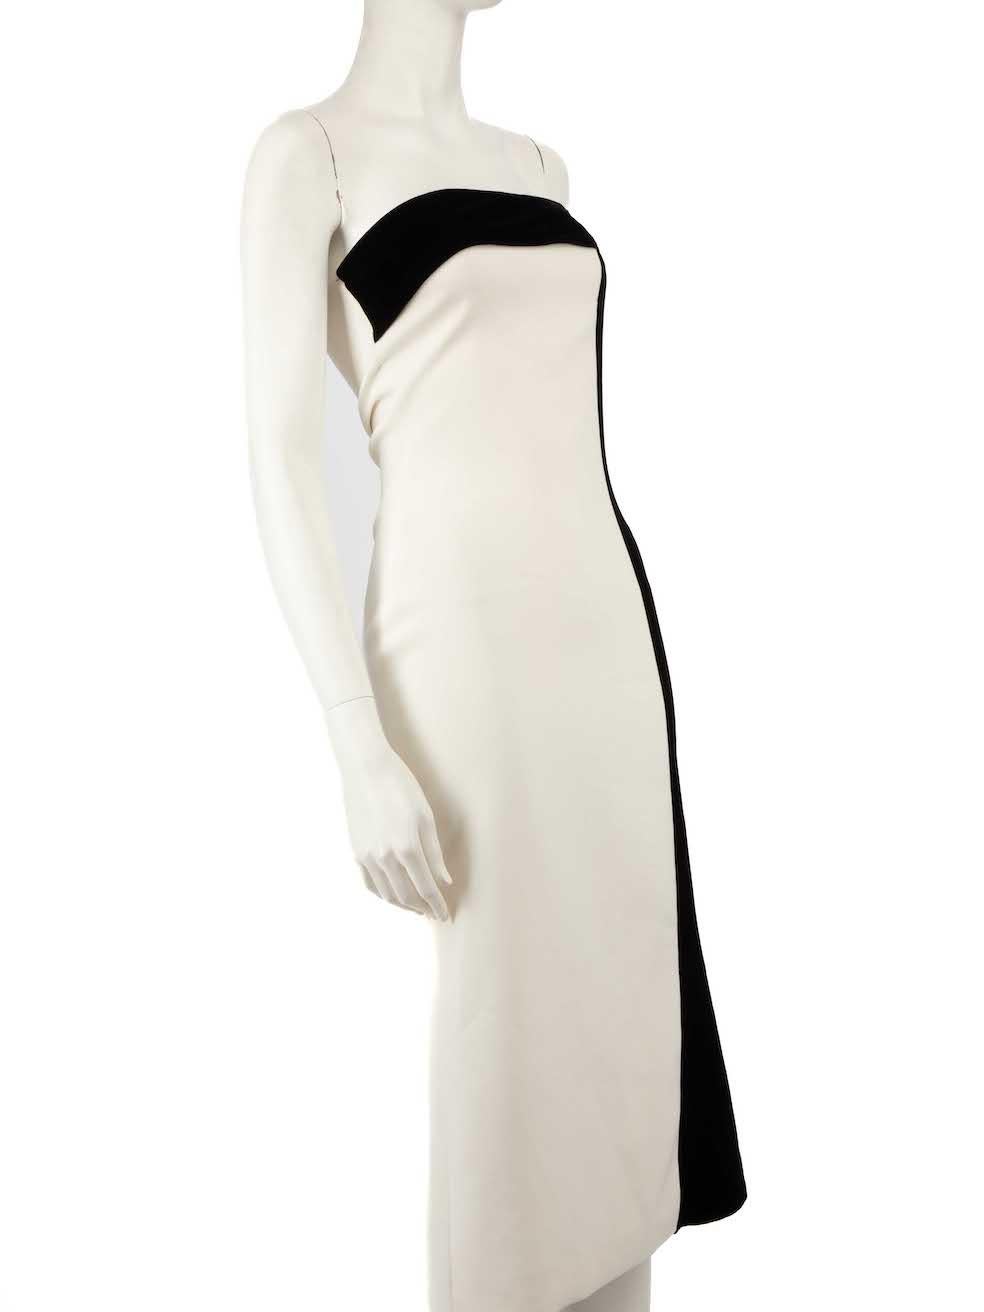 CONDITION is Very good. Minimal wear to dress is evident. Minimal marks to hem and bust on this used Honayda designer resale item.
 
 
 
 Details
 
 
 White
 
 Synthetic
 
 Dress
 
 Strapless
 
 Bodycon
 
 Black velvet trim
 
 Midi
 
 Side zip and